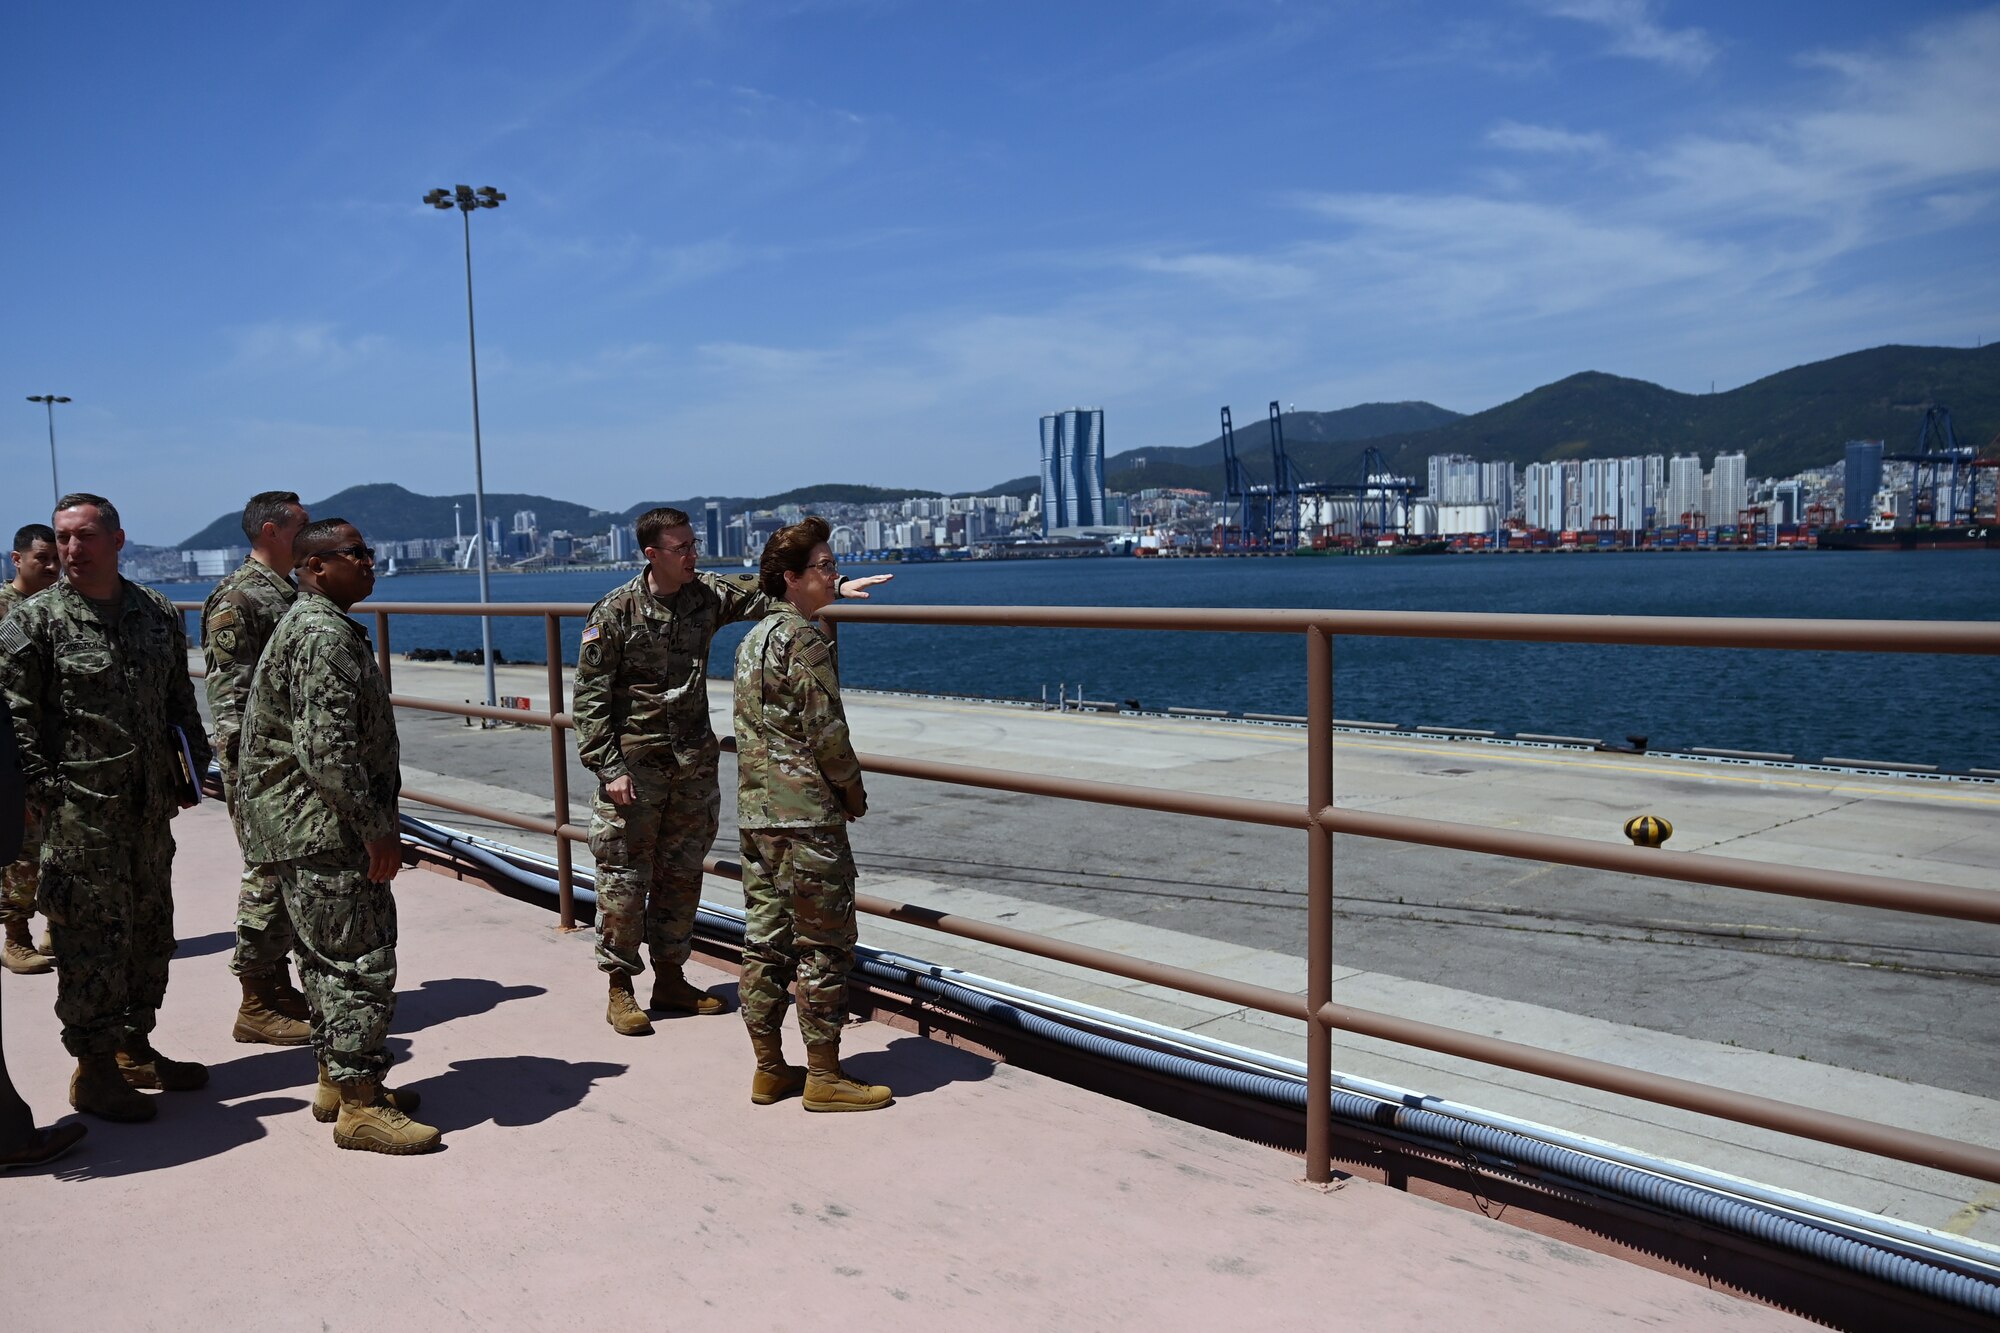 U.S. Army Lt. Col. Jamison Smith, 599th Transportation Brigade commander, briefs U.S. Air Force Gen. Jacqueline D. Van Ovost, commander, U.S. Transportation Command (USTRANSCOM), while touring the 837th Transportation Battalion May 17, 2022, Pier 8, Busan, Republic of Korea. Every operation the Joint Force participates in starts and ends with USTRANSCOM. (U.S. Air Force photo by Master Sgt. Rachelle Morris)